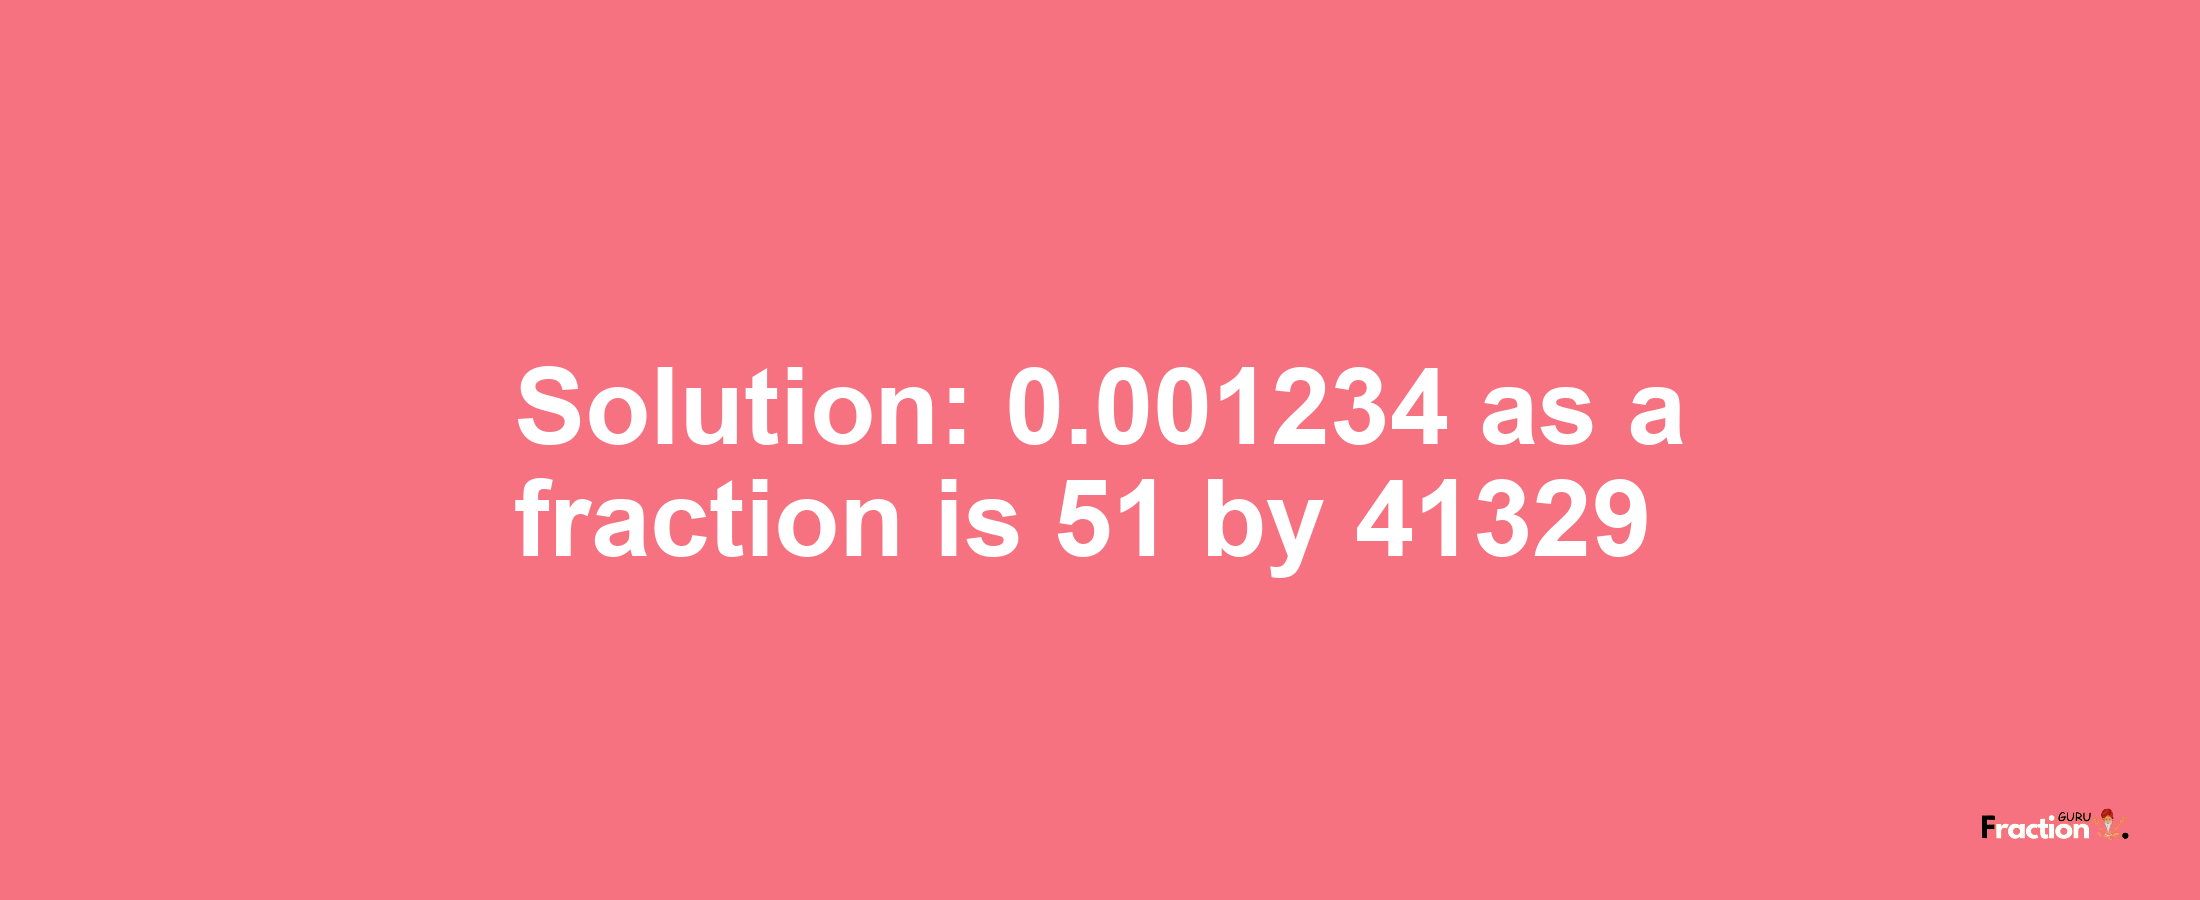 Solution:0.001234 as a fraction is 51/41329